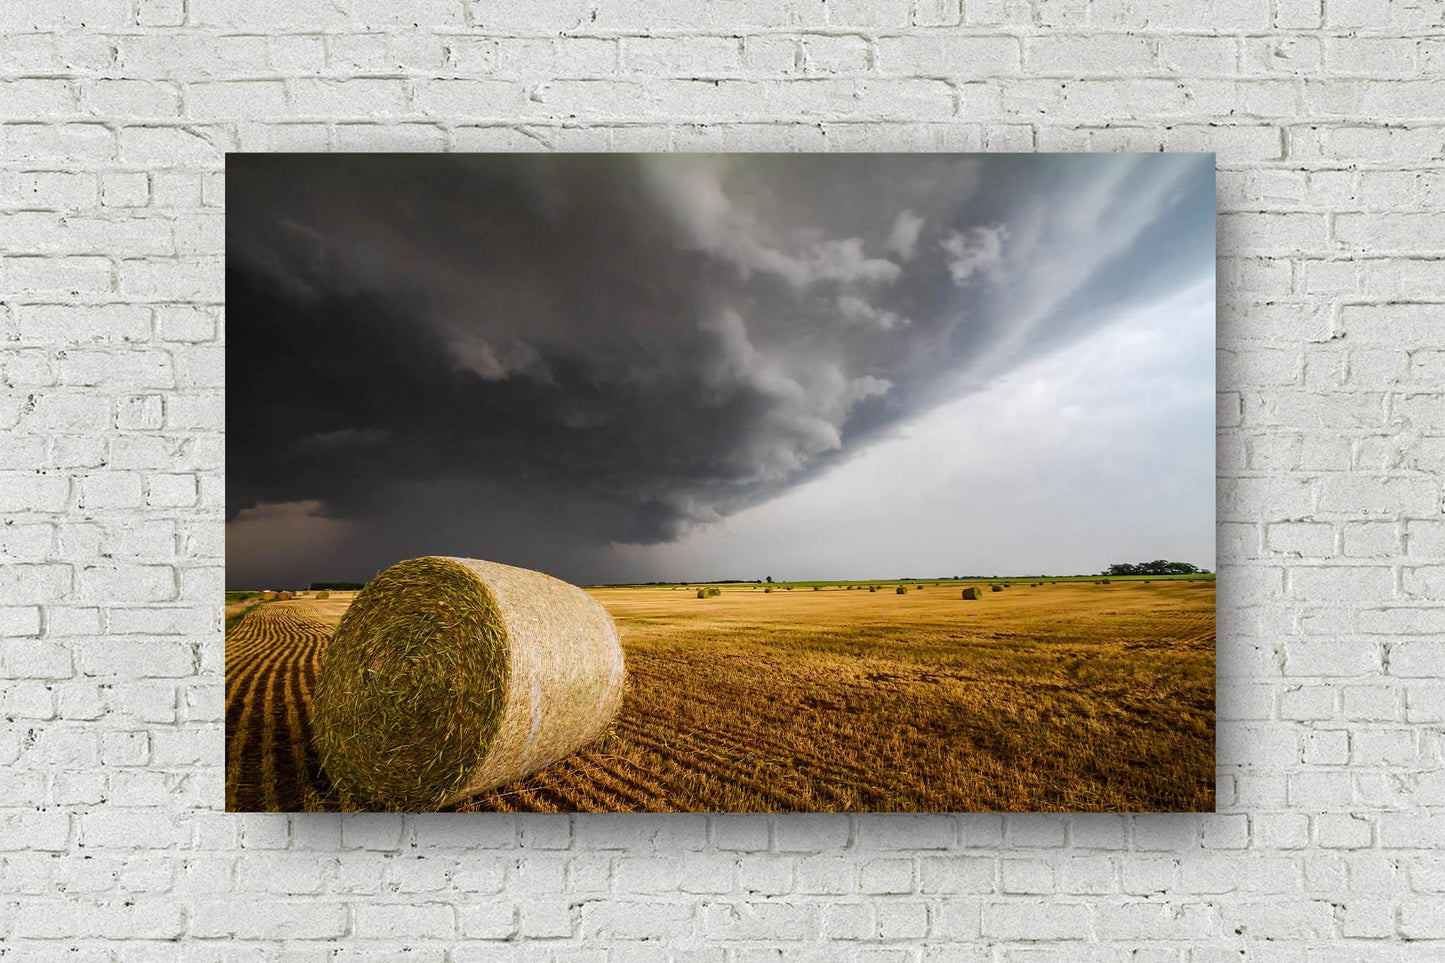 Country metal print of a storm advancing over a golden round hay bale in a field on a stormy spring day in Kansas by Sean Ramsey of Southern Plains Photography.